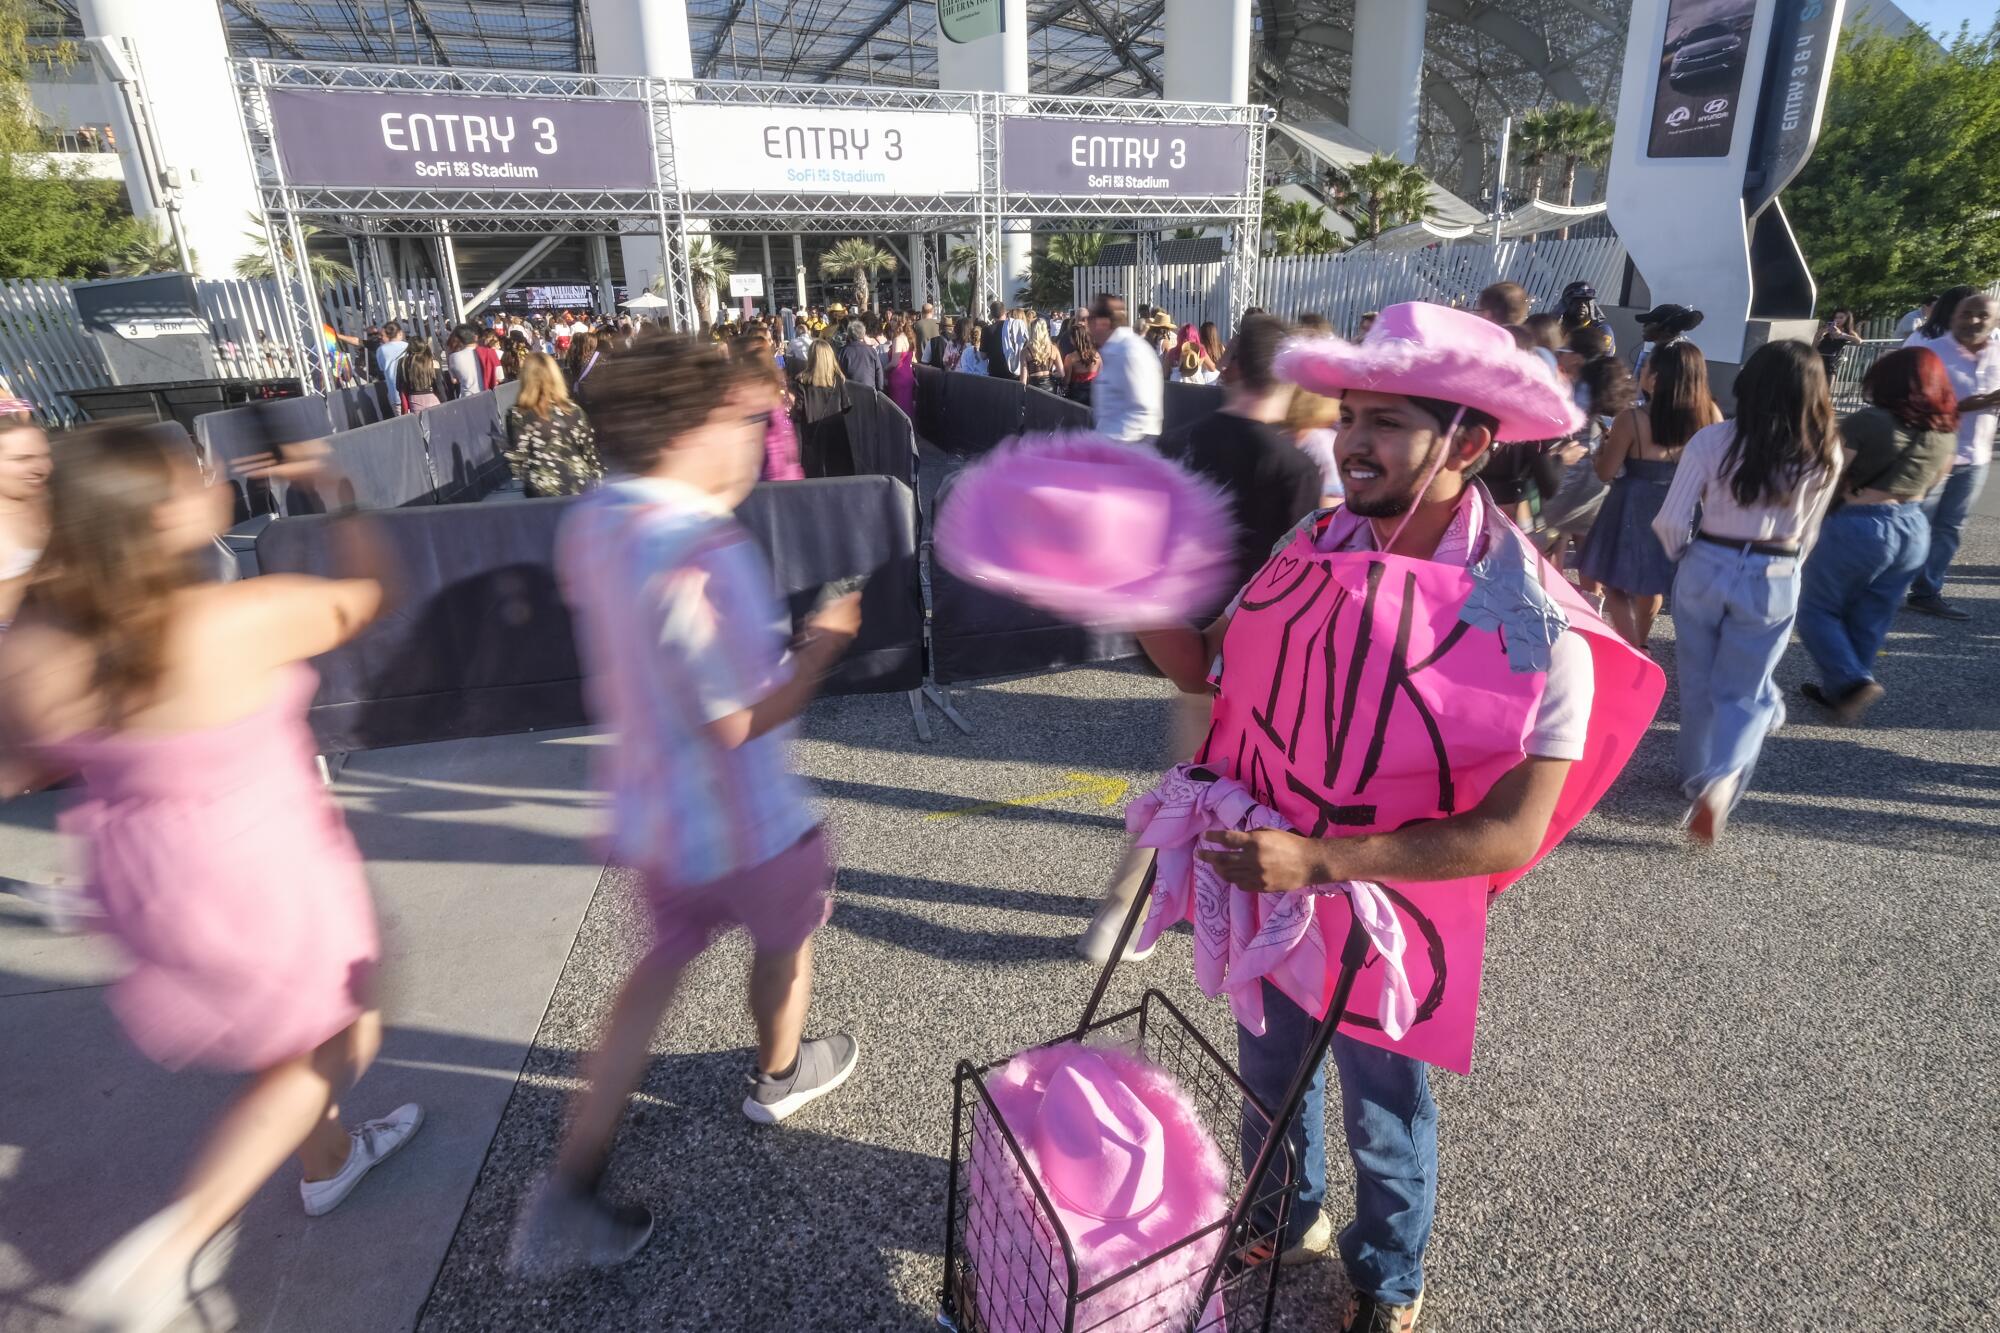 A man hold pink hats while wearing one as people walk past him.